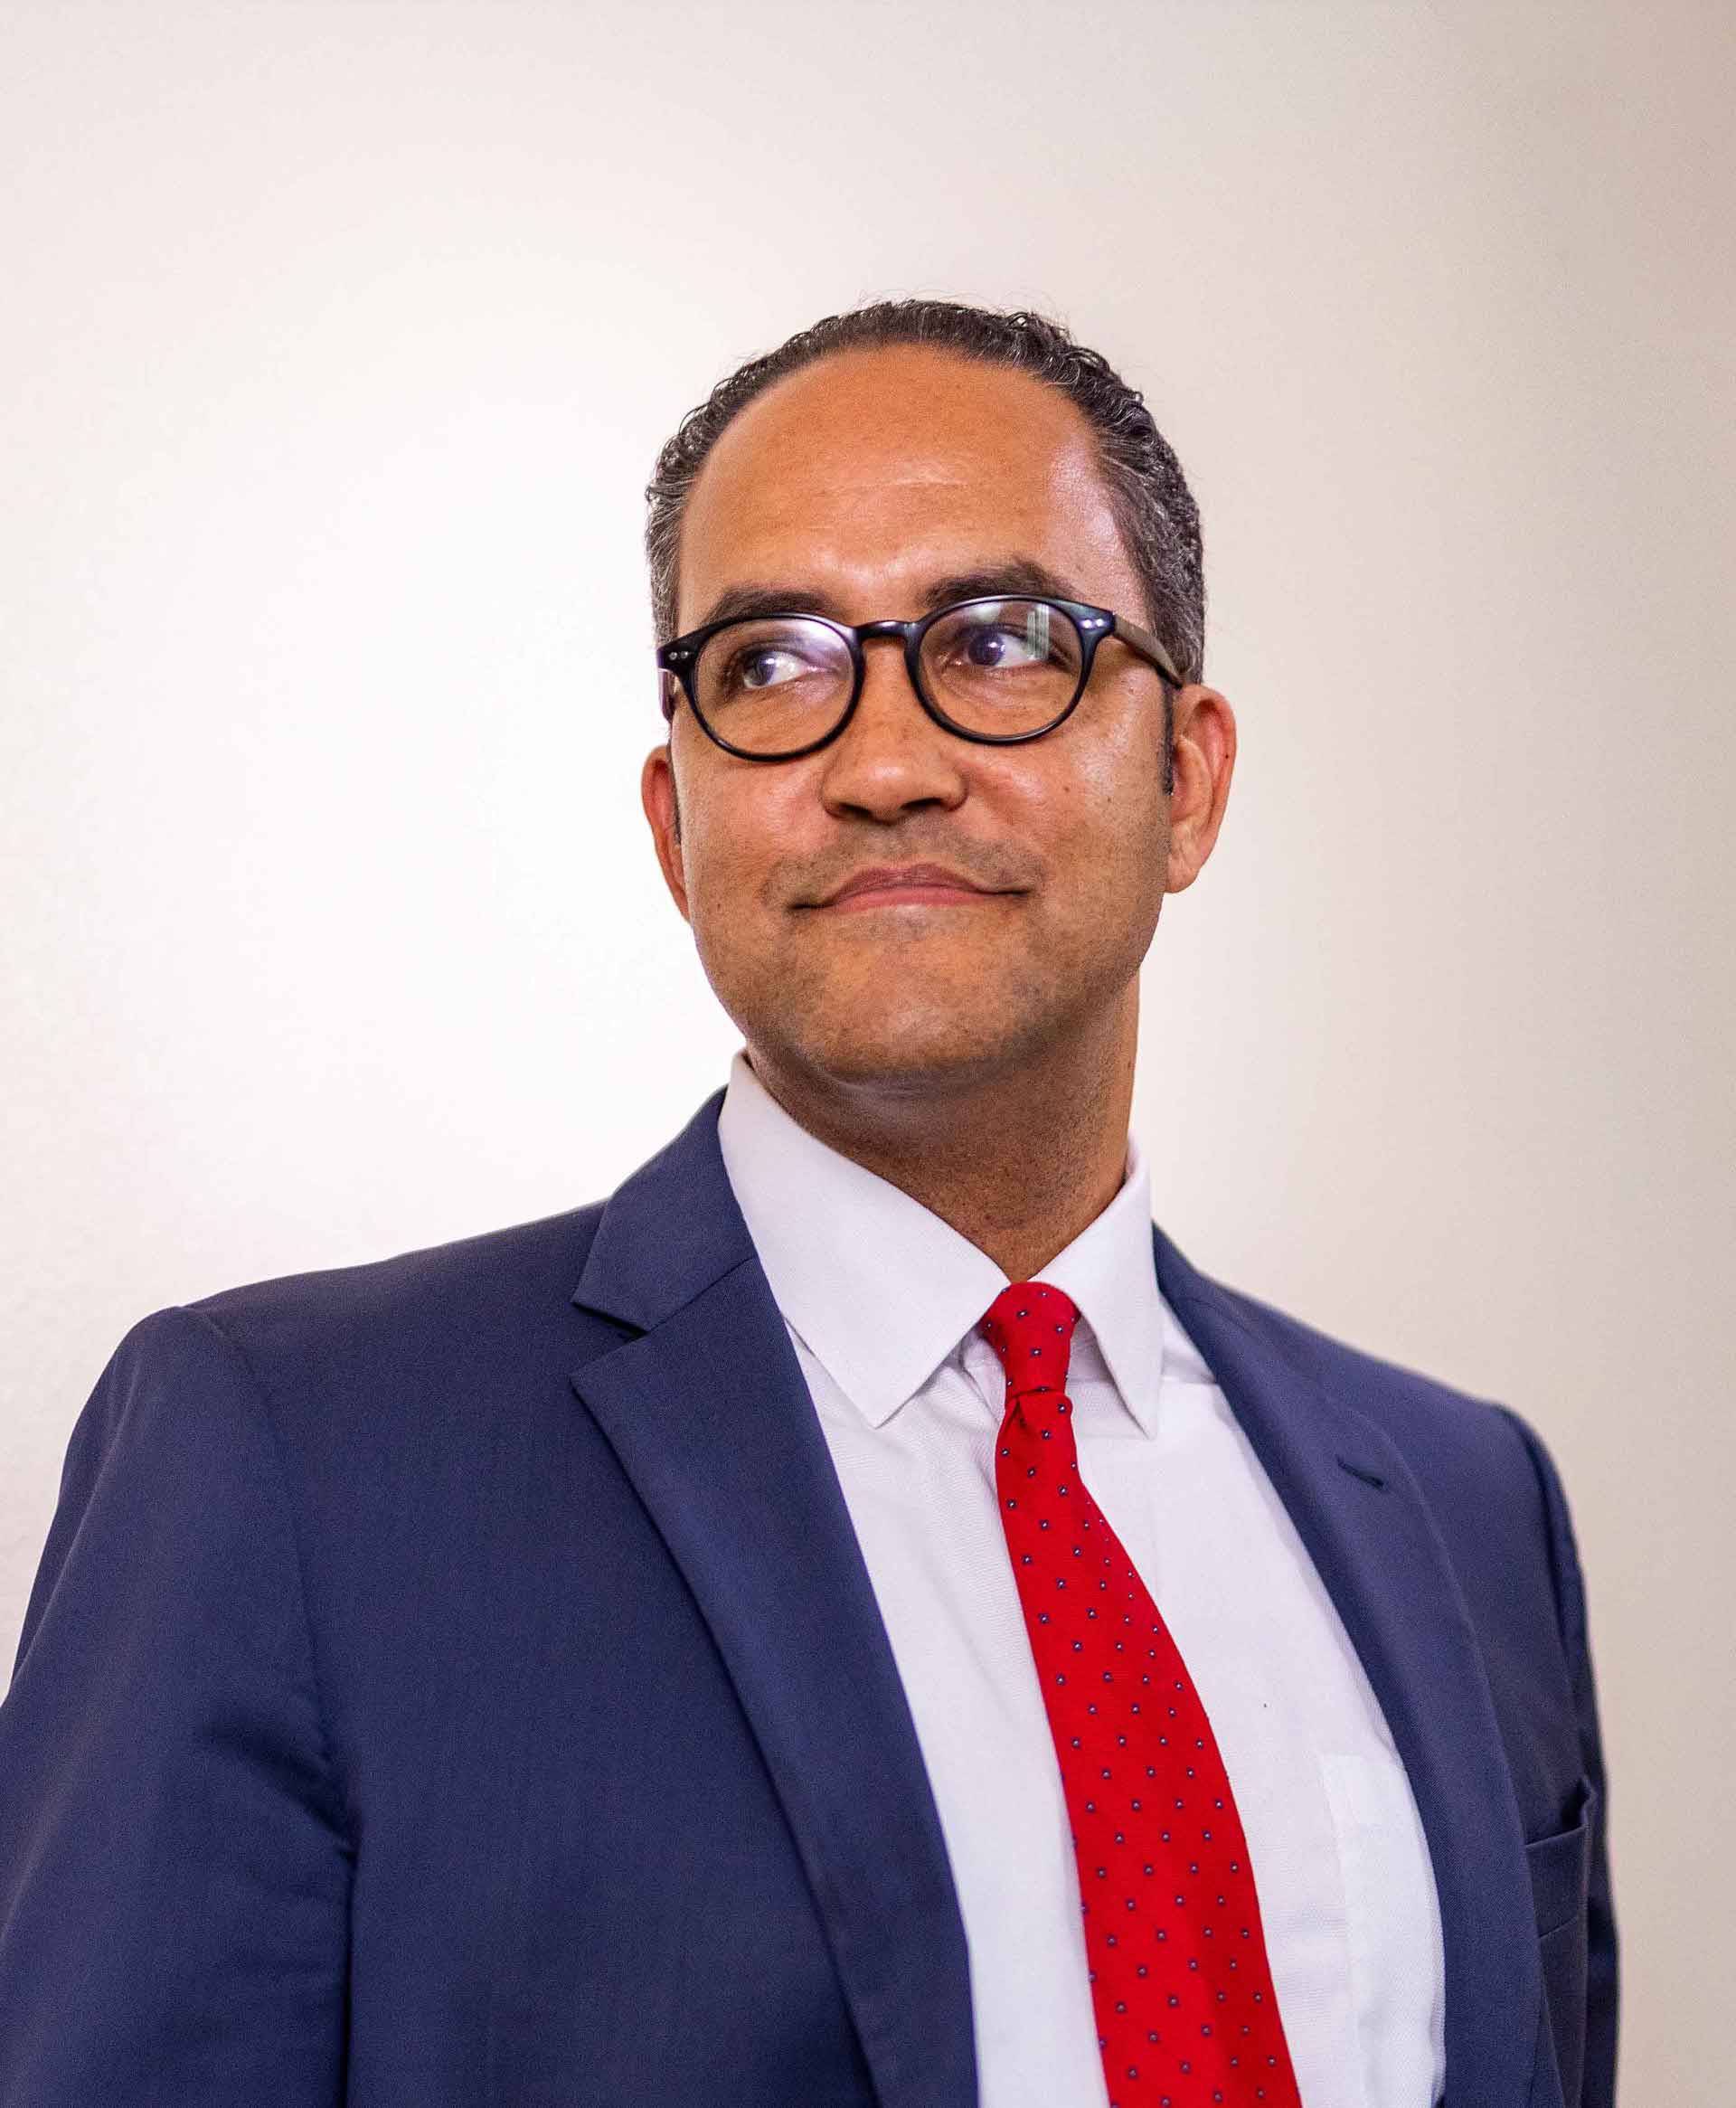 Will Hurd - Portrait picture in a blue suit